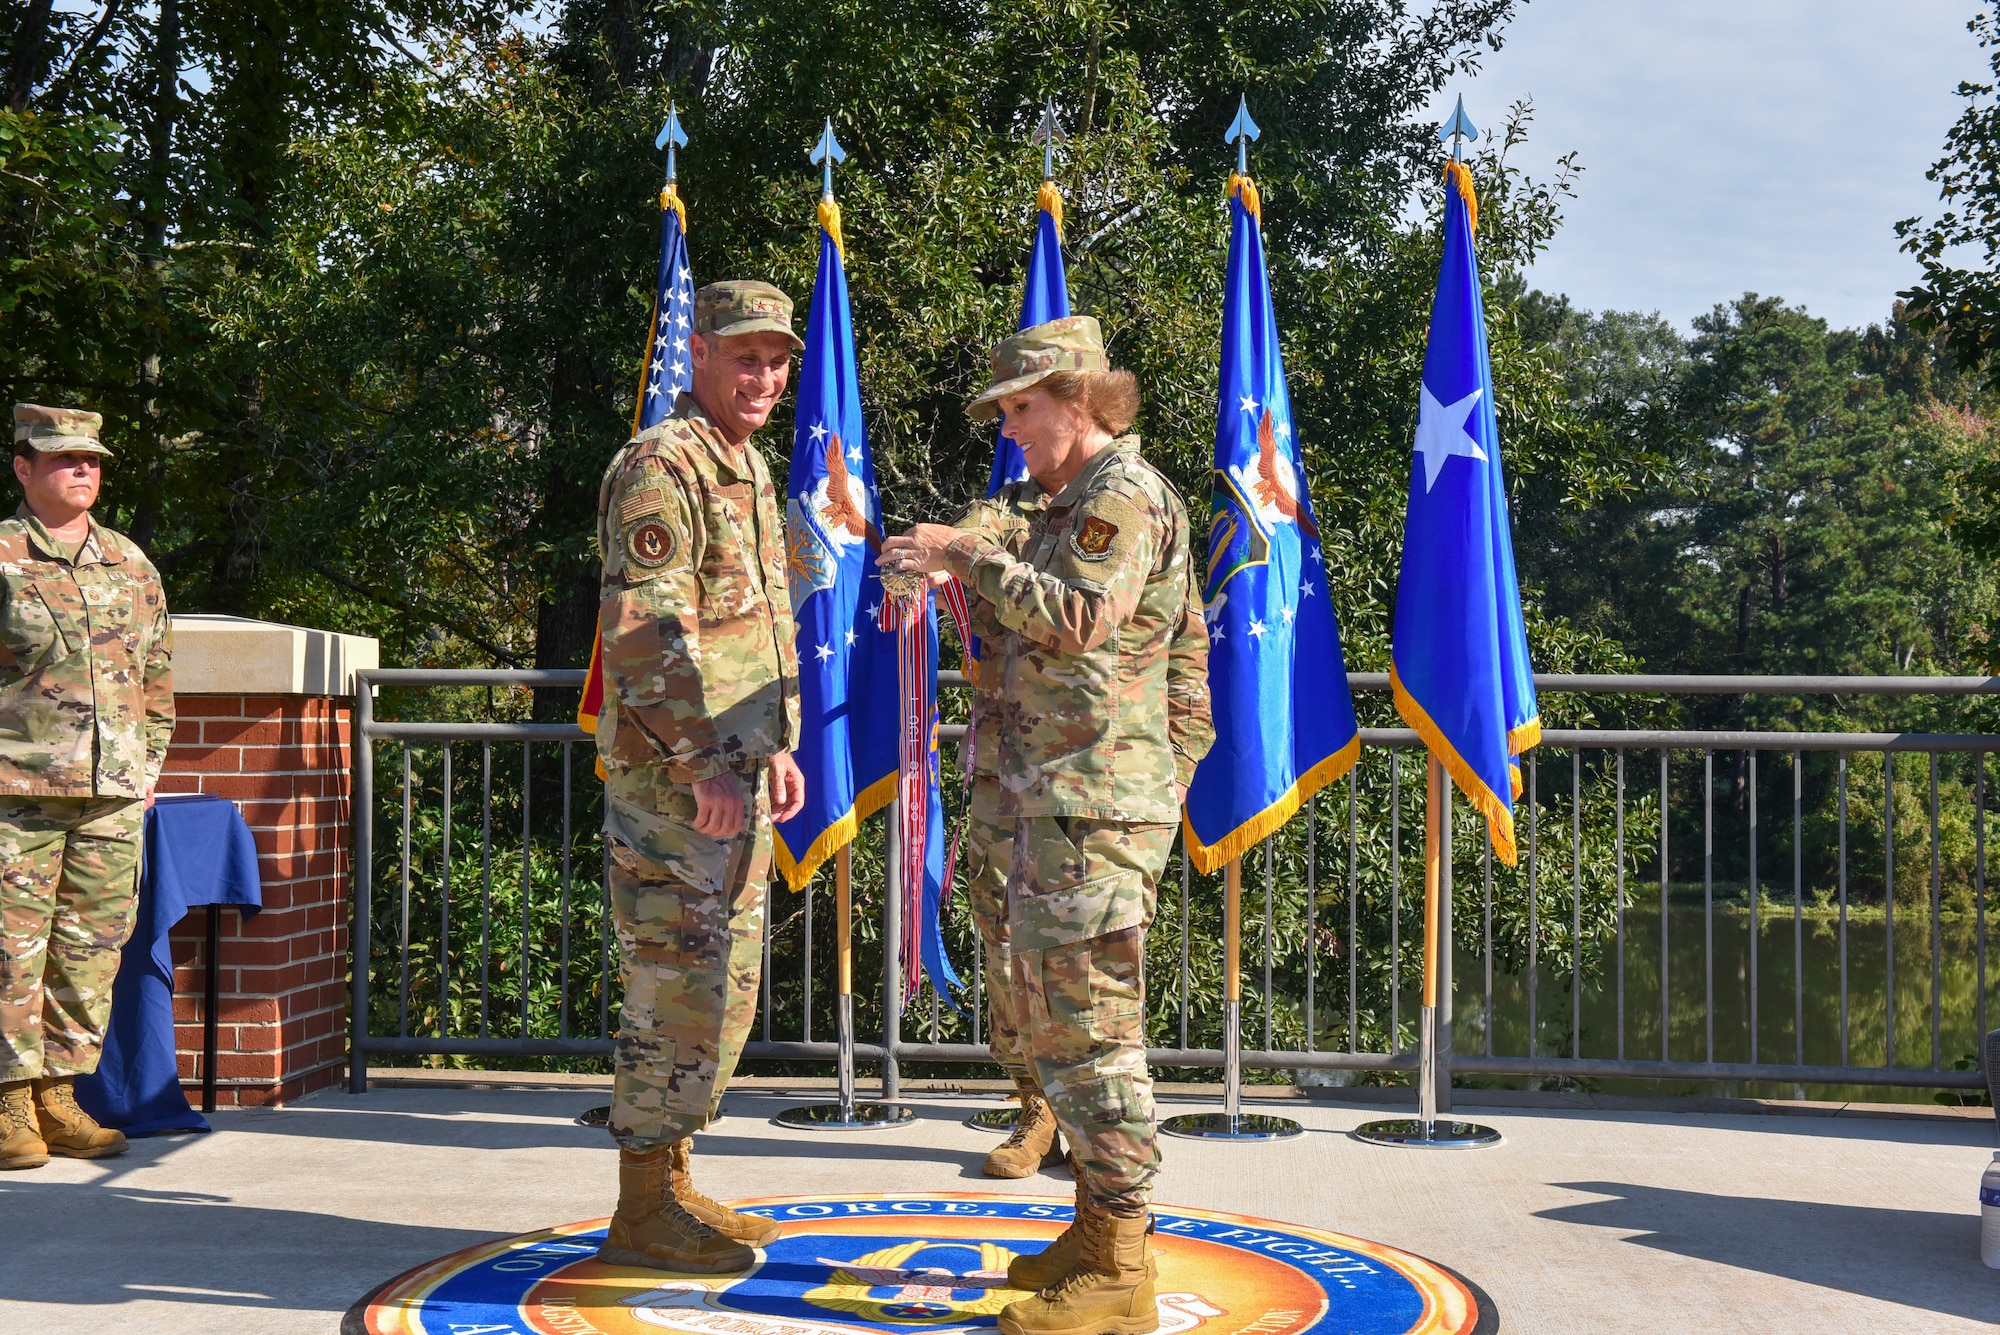 Maj. Gen. Matthew J. Burger, deputy commander of Air Force Reserve Command, left, and Brig. Gen. Stacey L. Scarisbrick, commander of AFRC Force Generation Center, place the Air Force Organizational Excellence award streamer to the guidon during a ceremony celebrating the 10th anniversary of AFRC's FGC at Robins Air Force Base, Georgia, Oct. 1, 2021. The FGC is the single organization responsible for generating Air Force Reserve forces by leveraging Reserve strategic capability to meet operational needs in support of the global force. The Reserve Citizen Airmen who support the FGC perform all aspects of force generation to include oversight, visibility and accountability of more than 70,000 Air Force Reserve forces. (U.S. Air Force photo by Misuzu Allen)